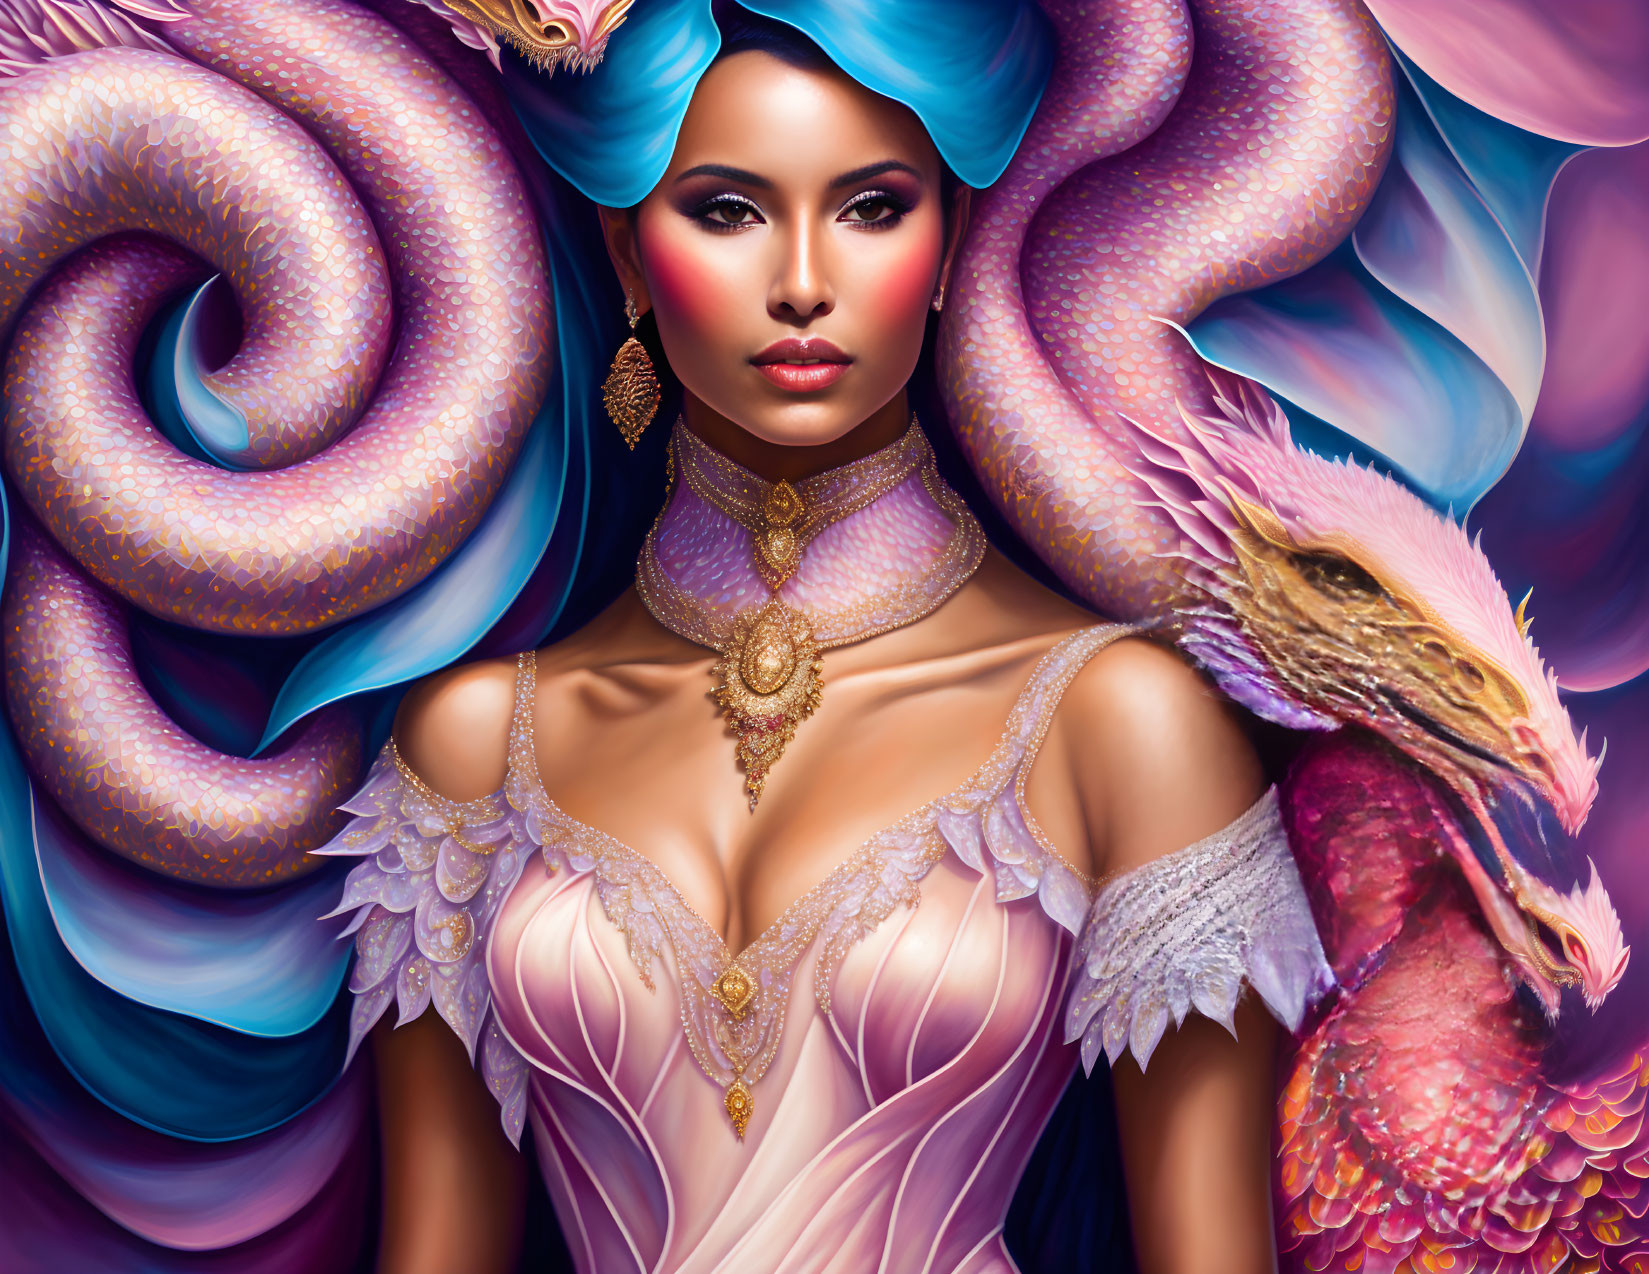 Fantasy digital art: Woman with elaborate makeup and attire, accompanied by colorful dragon creature.